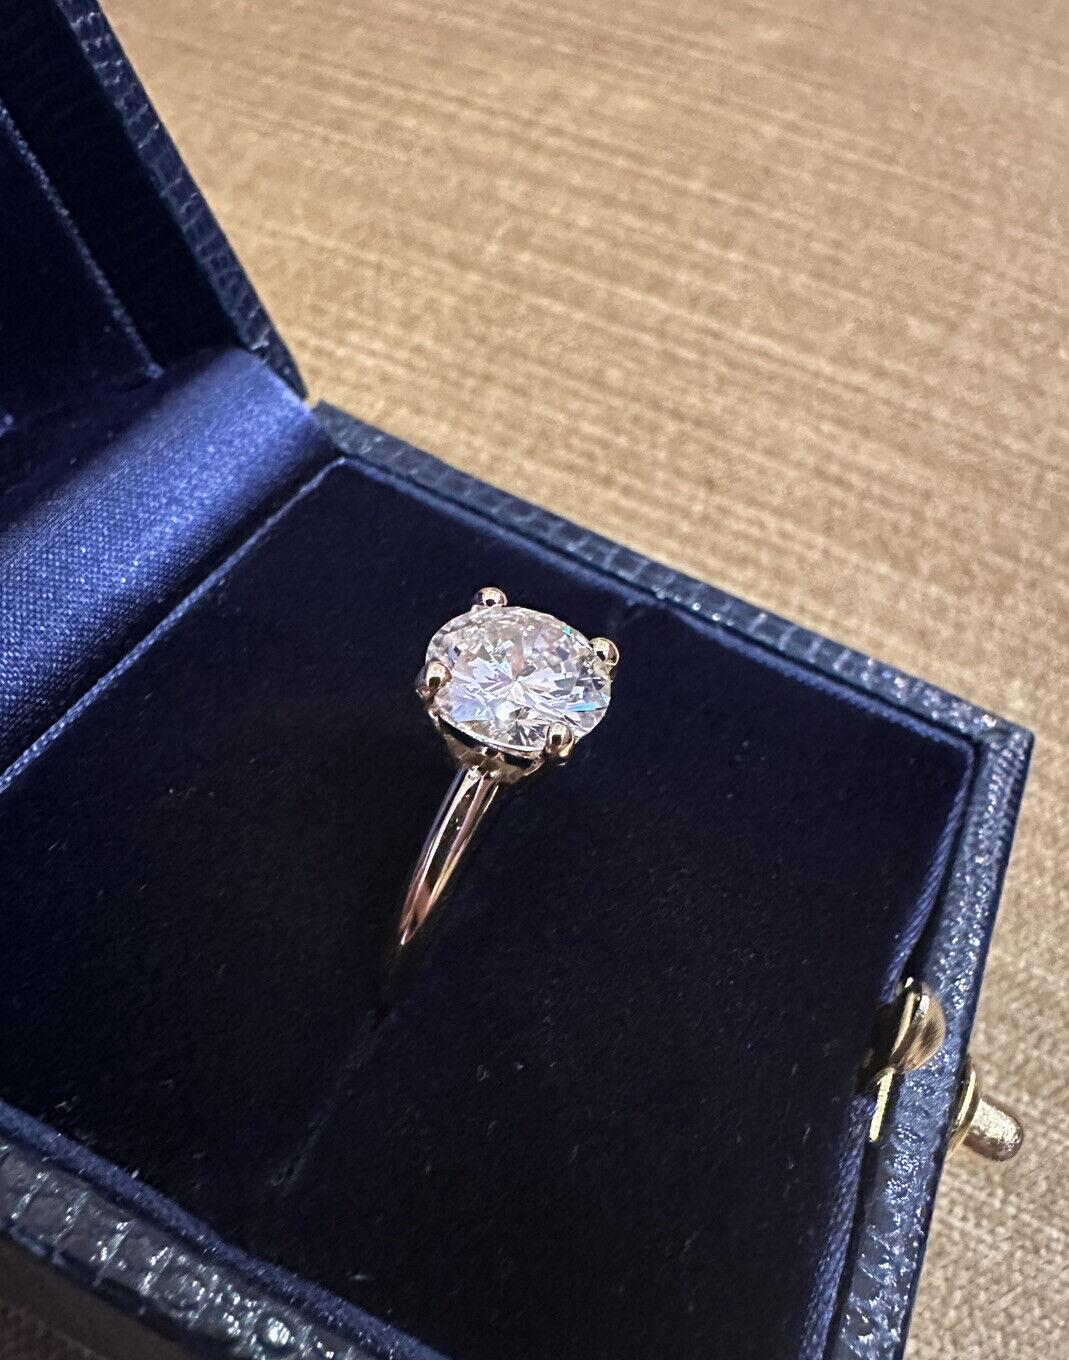 GIA 2.09 Carat Round Diamond Solitaire Engagement Ring in 18k Yellow Gold In Excellent Condition For Sale In La Jolla, CA